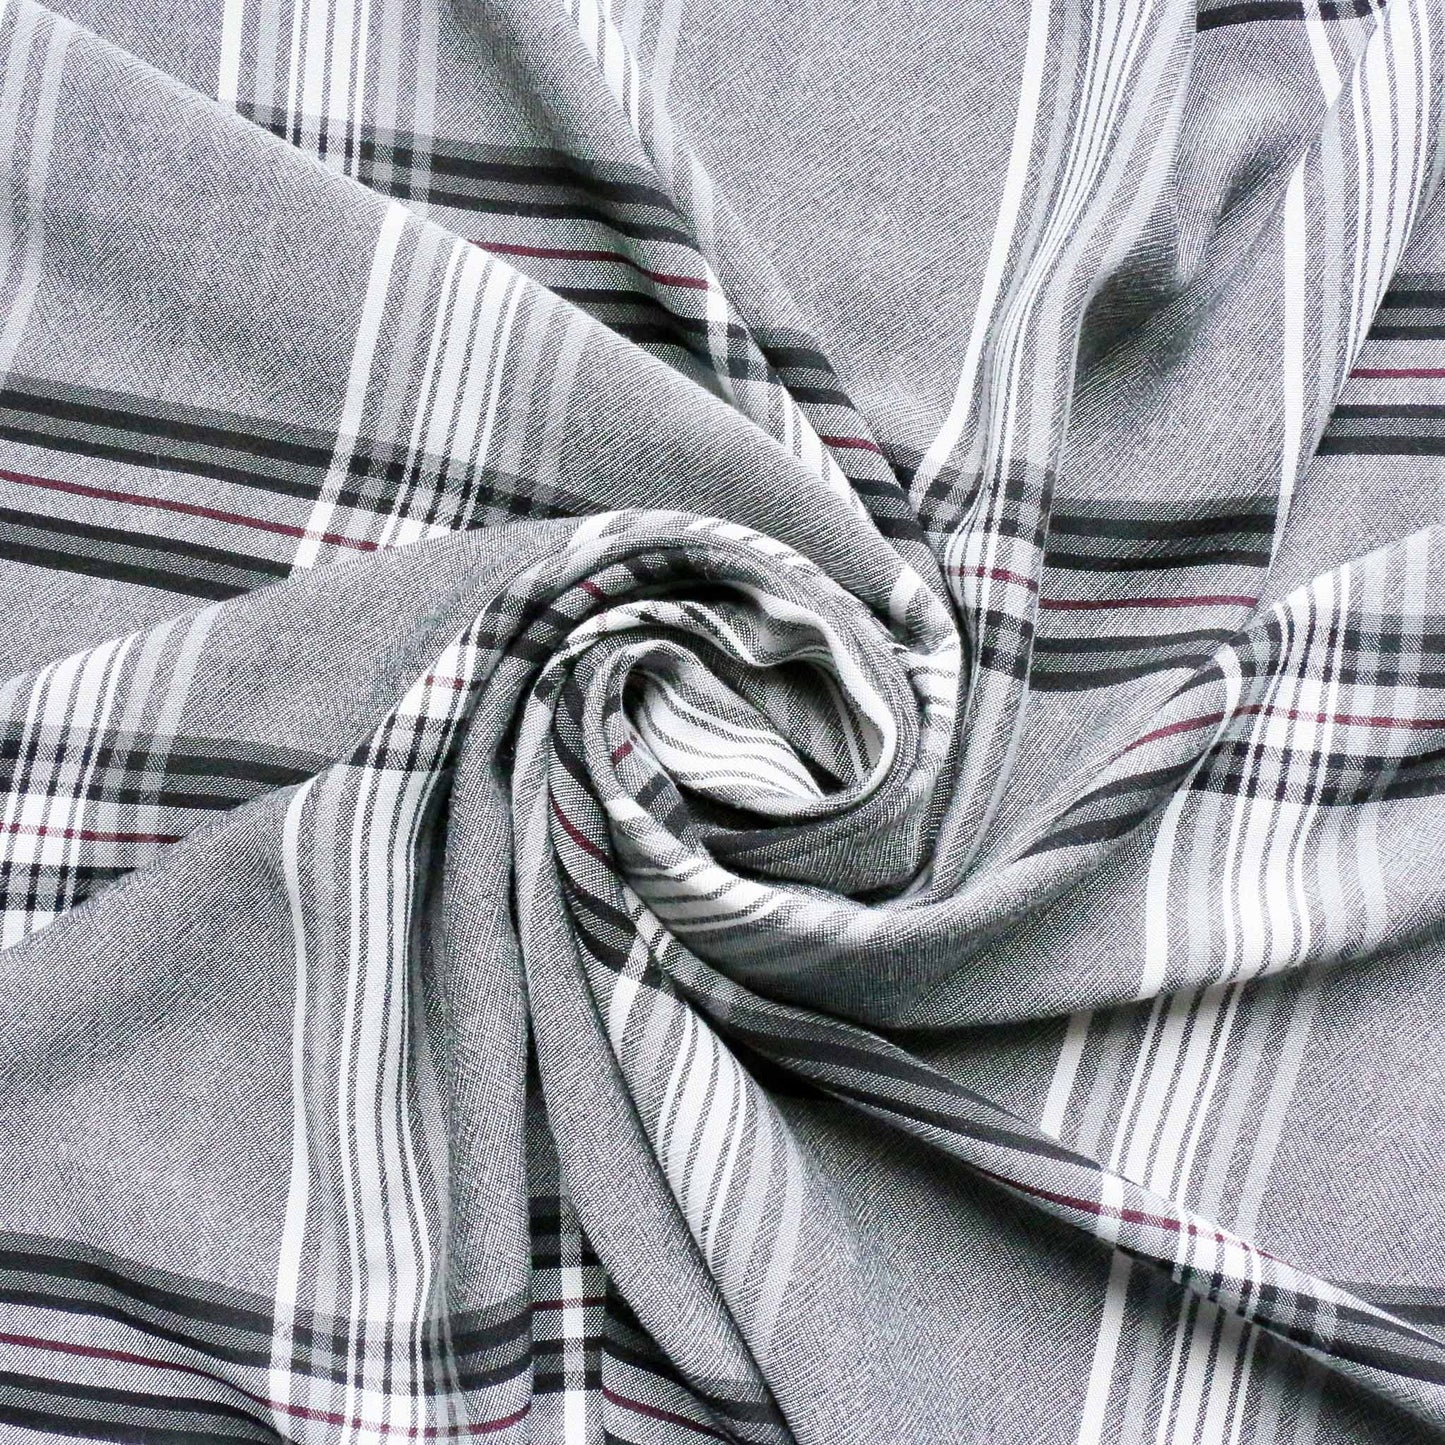 grey viscose challis dressmaking fabric with white and black check pattern